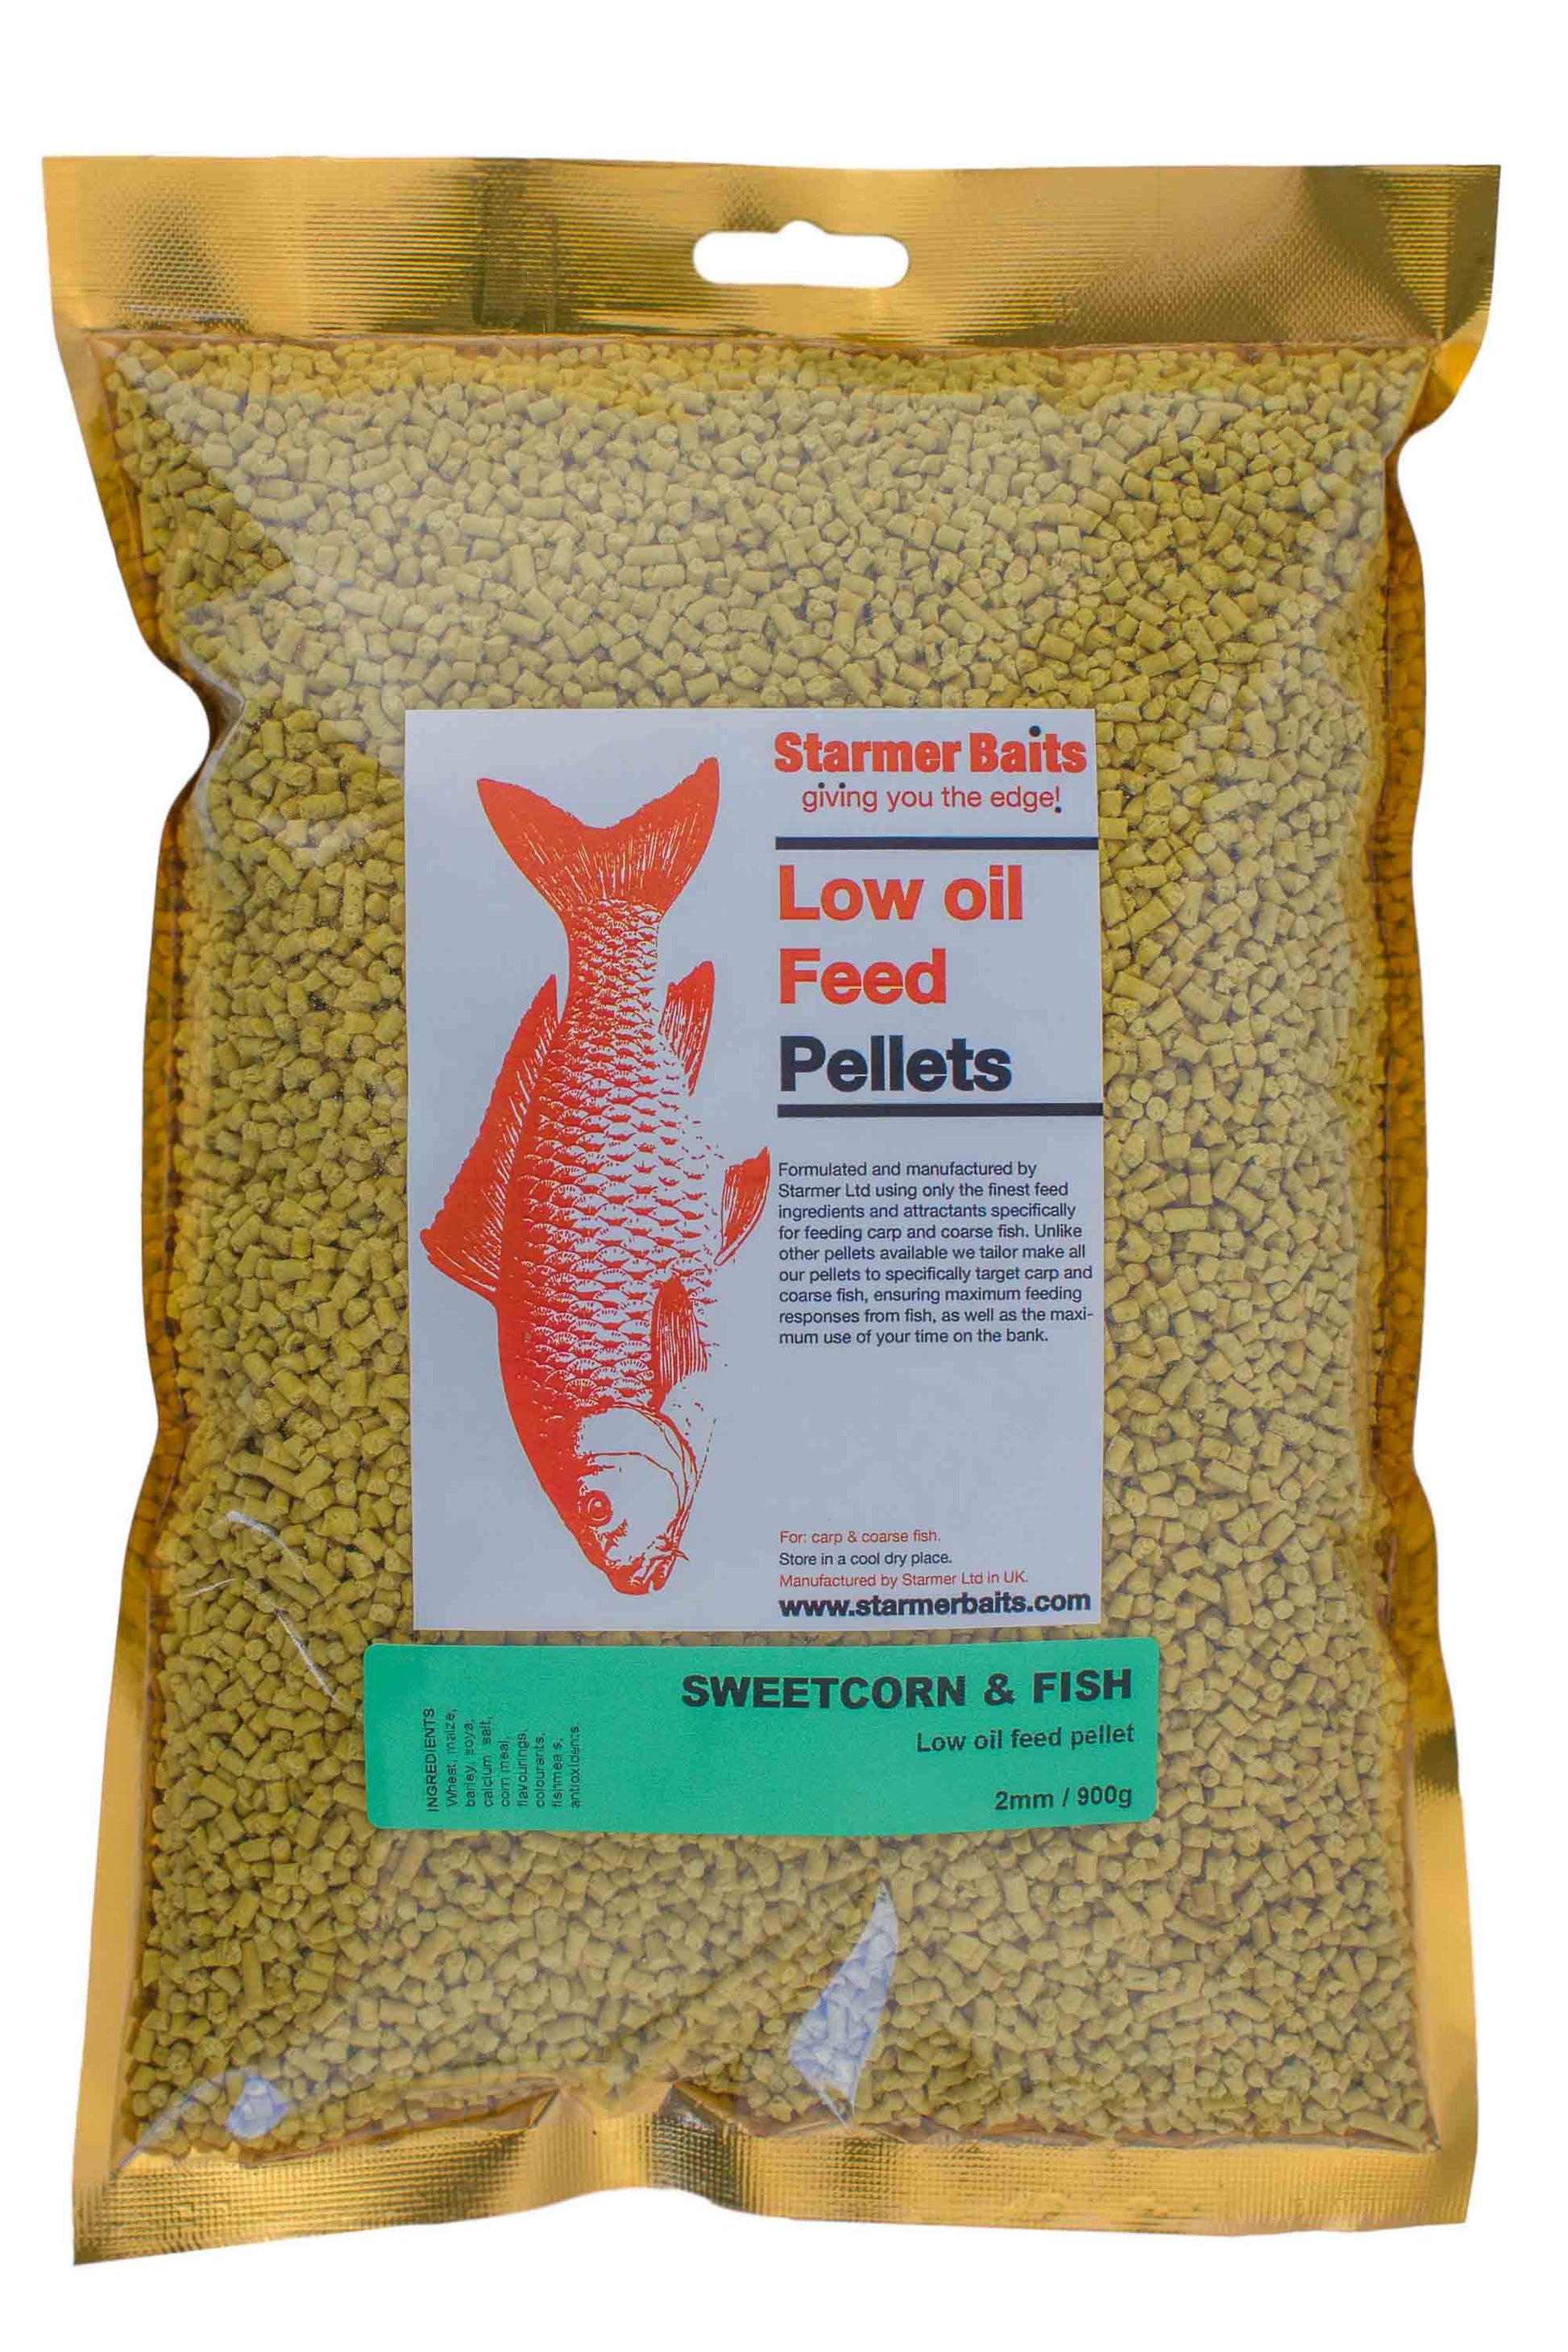 Sweetcorn fish low oil feed pellets for carp and coarse – Starmer Ltd